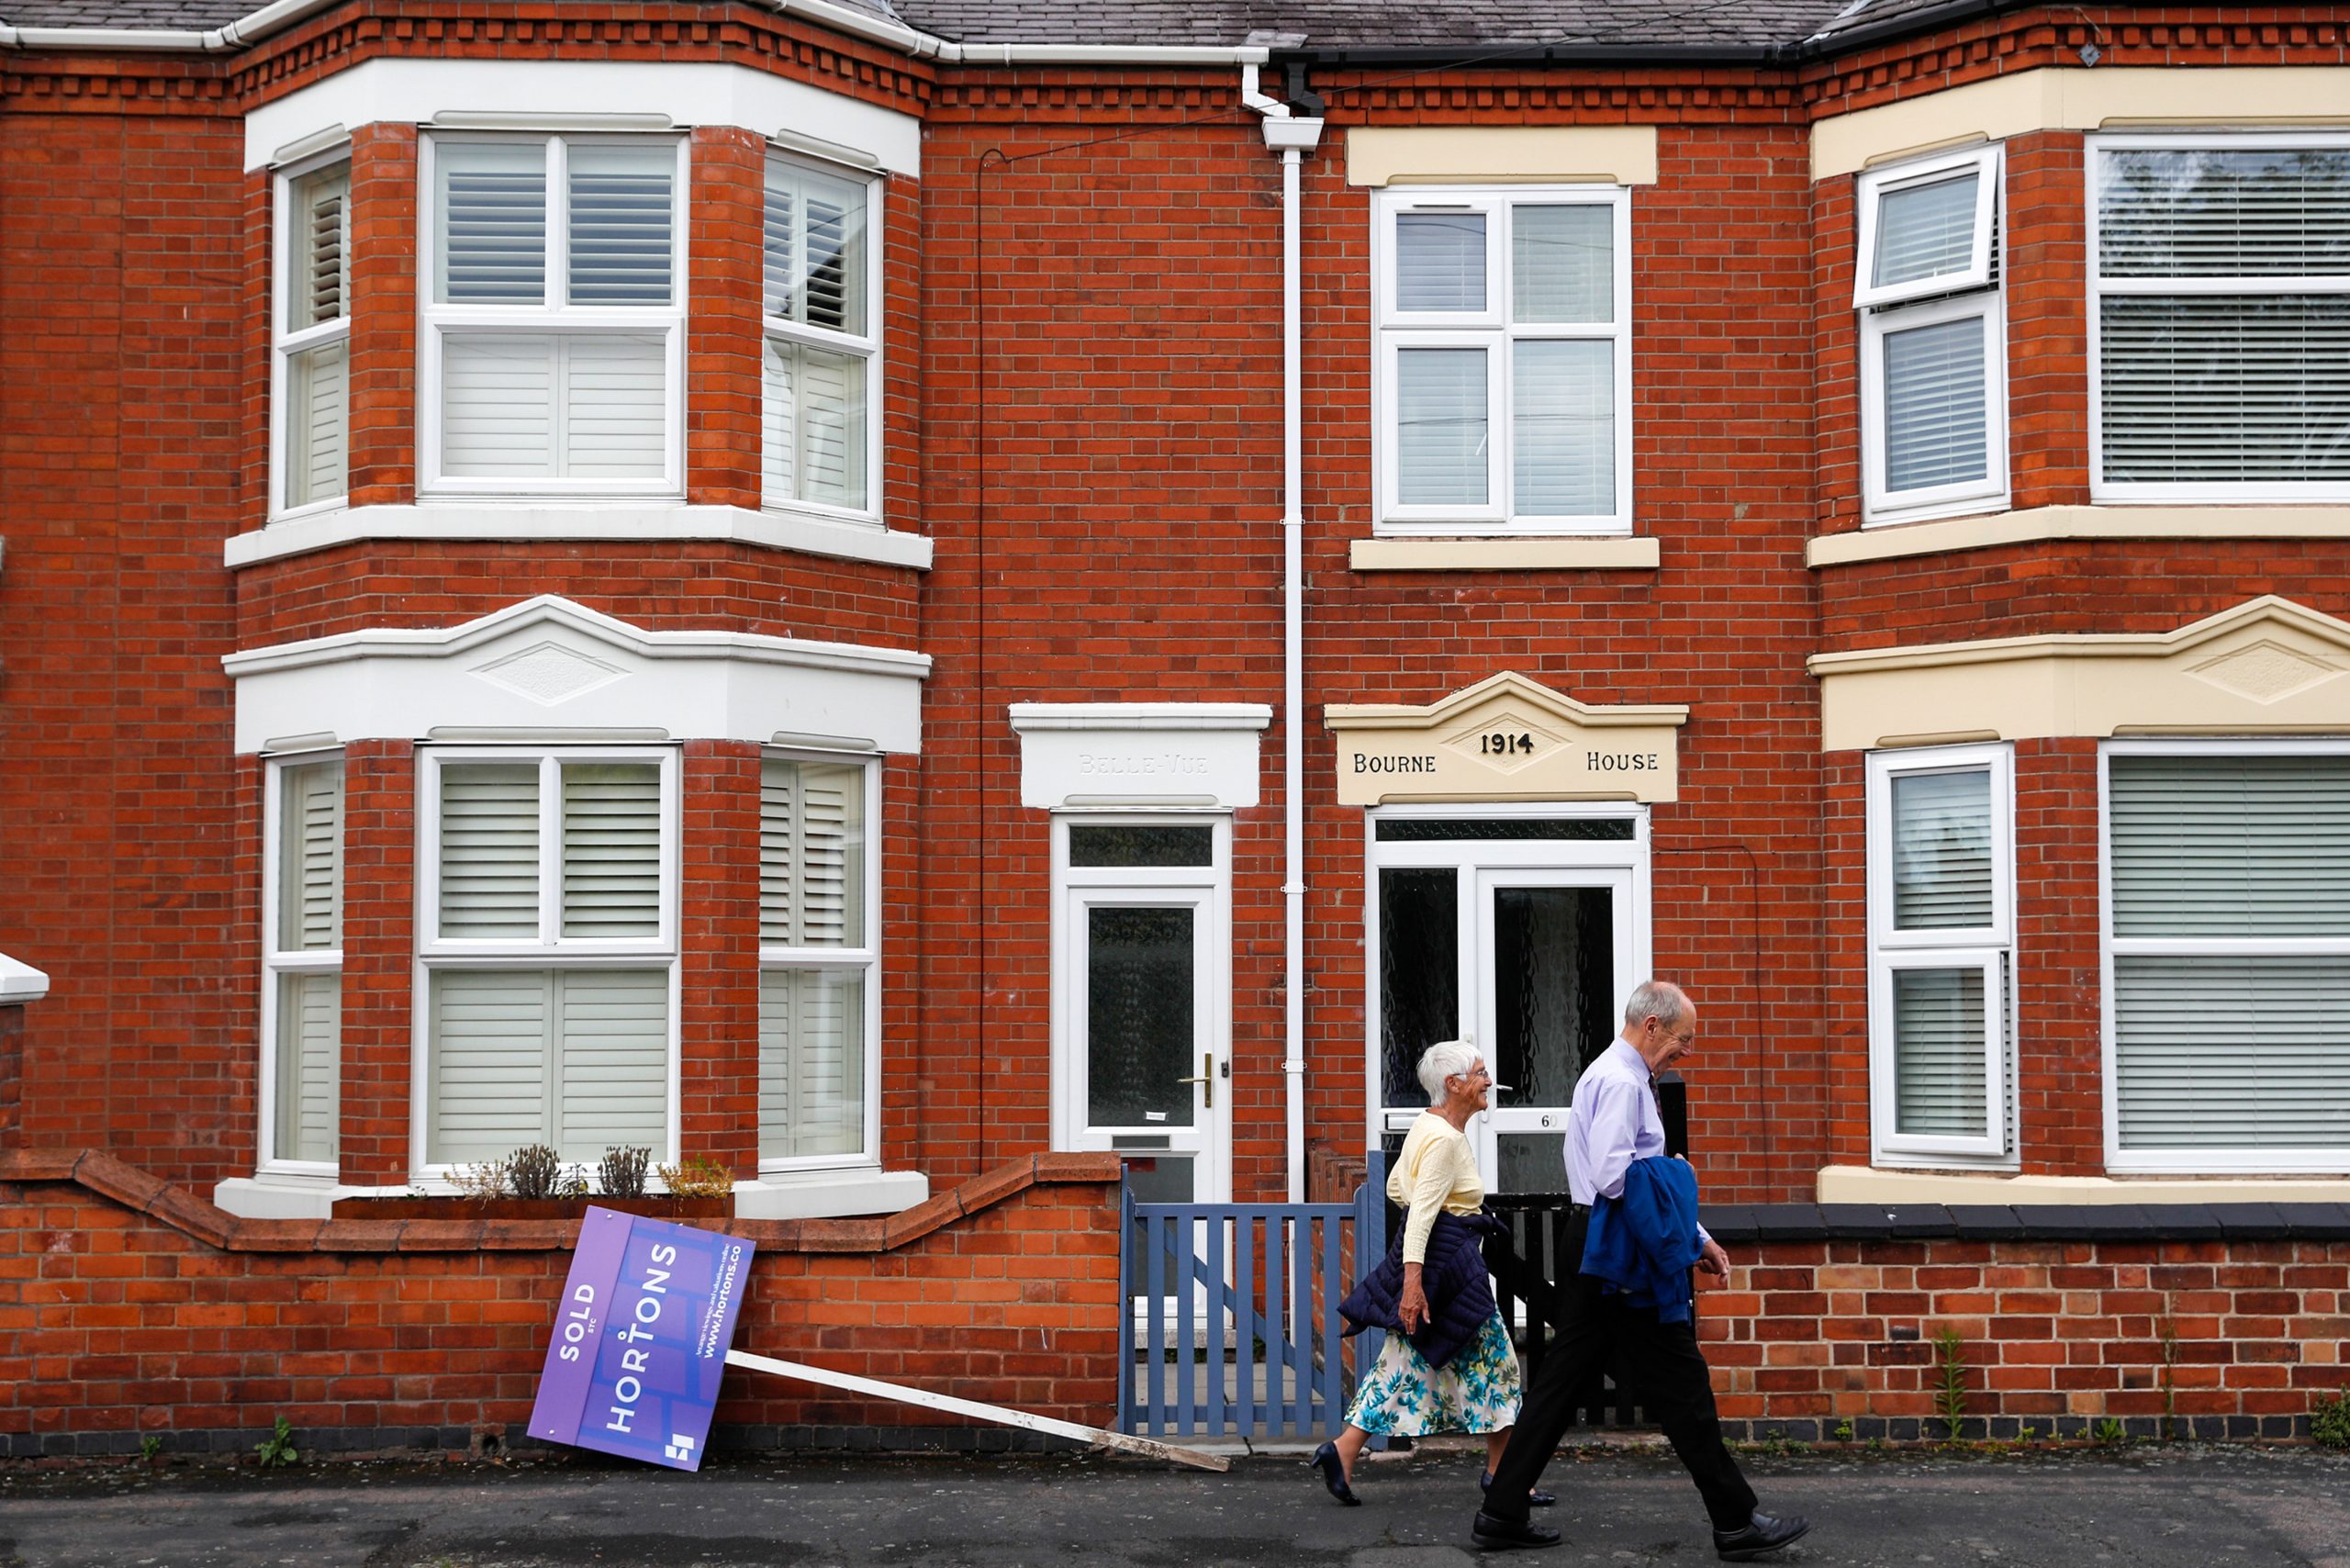 Home prices to surge in both the U.S. and U.K. because of one key metric